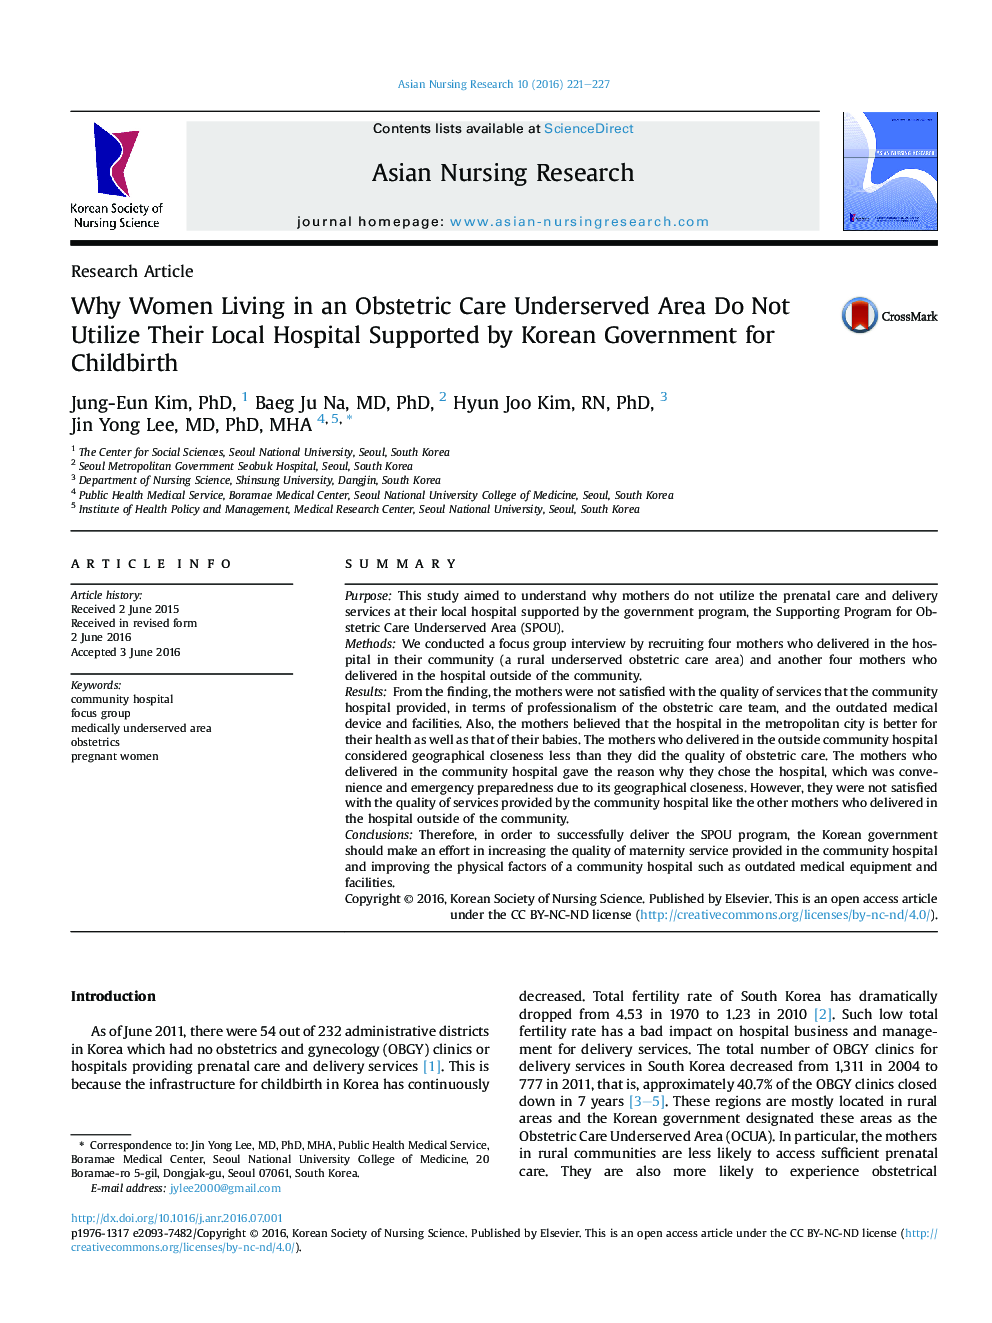 Why Women Living in an Obstetric Care Underserved Area Do Not Utilize Their Local Hospital Supported by Korean Government for Childbirth